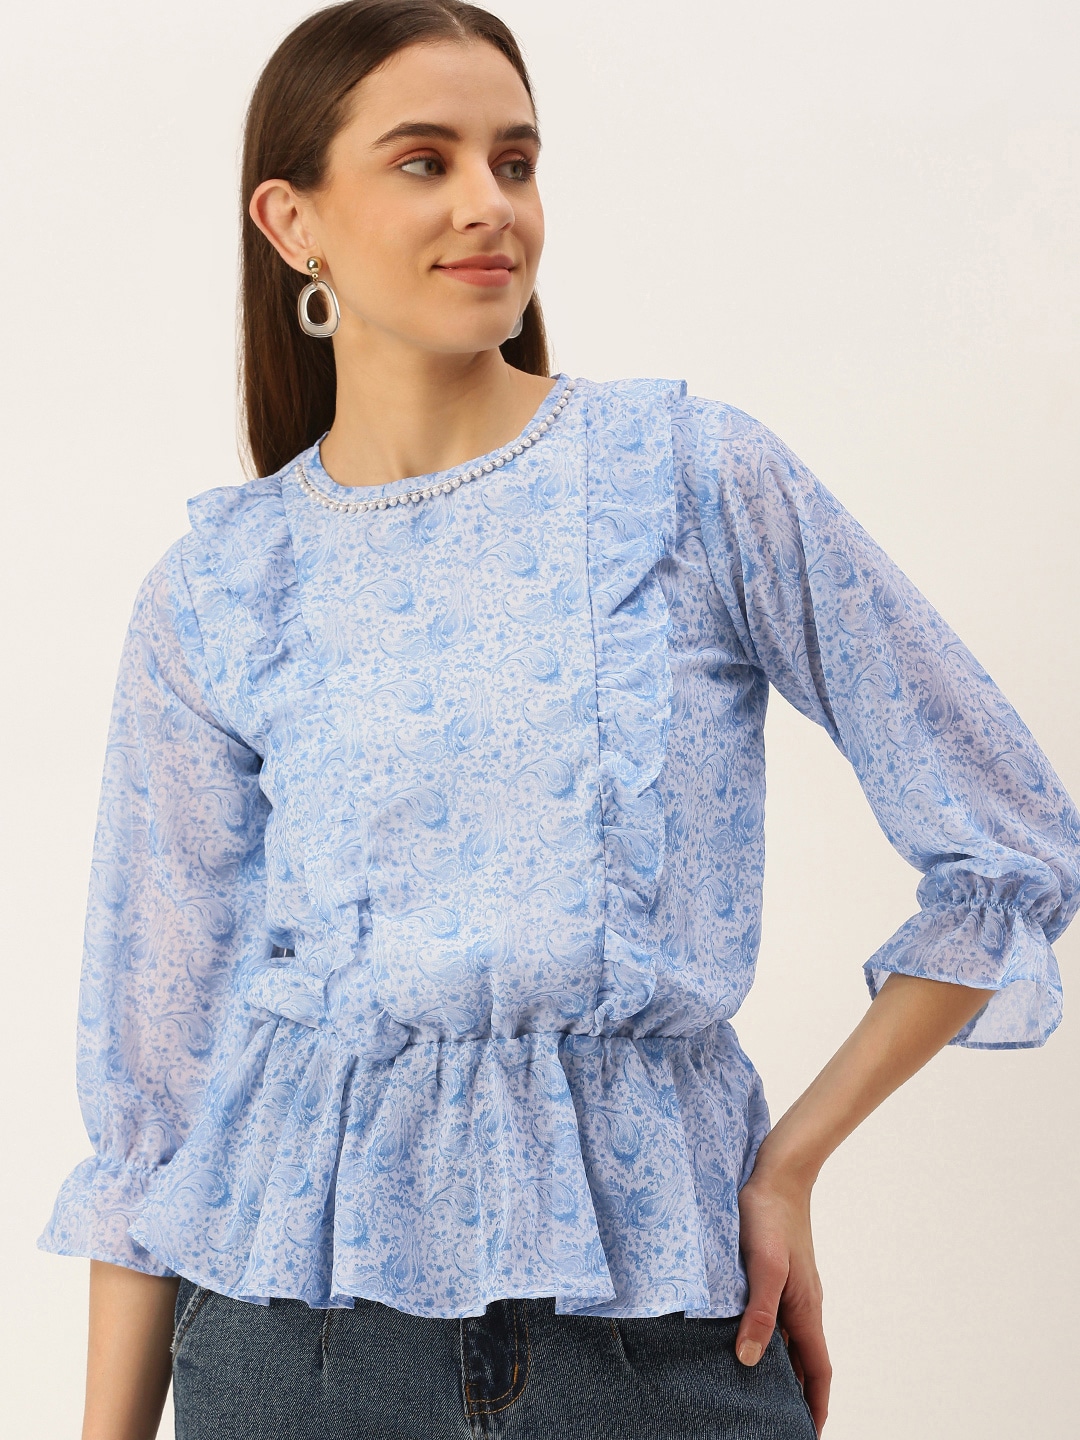 MELOSO Blue & White Floral Print Ruffles Georgette Cinched Waist Top Price in India